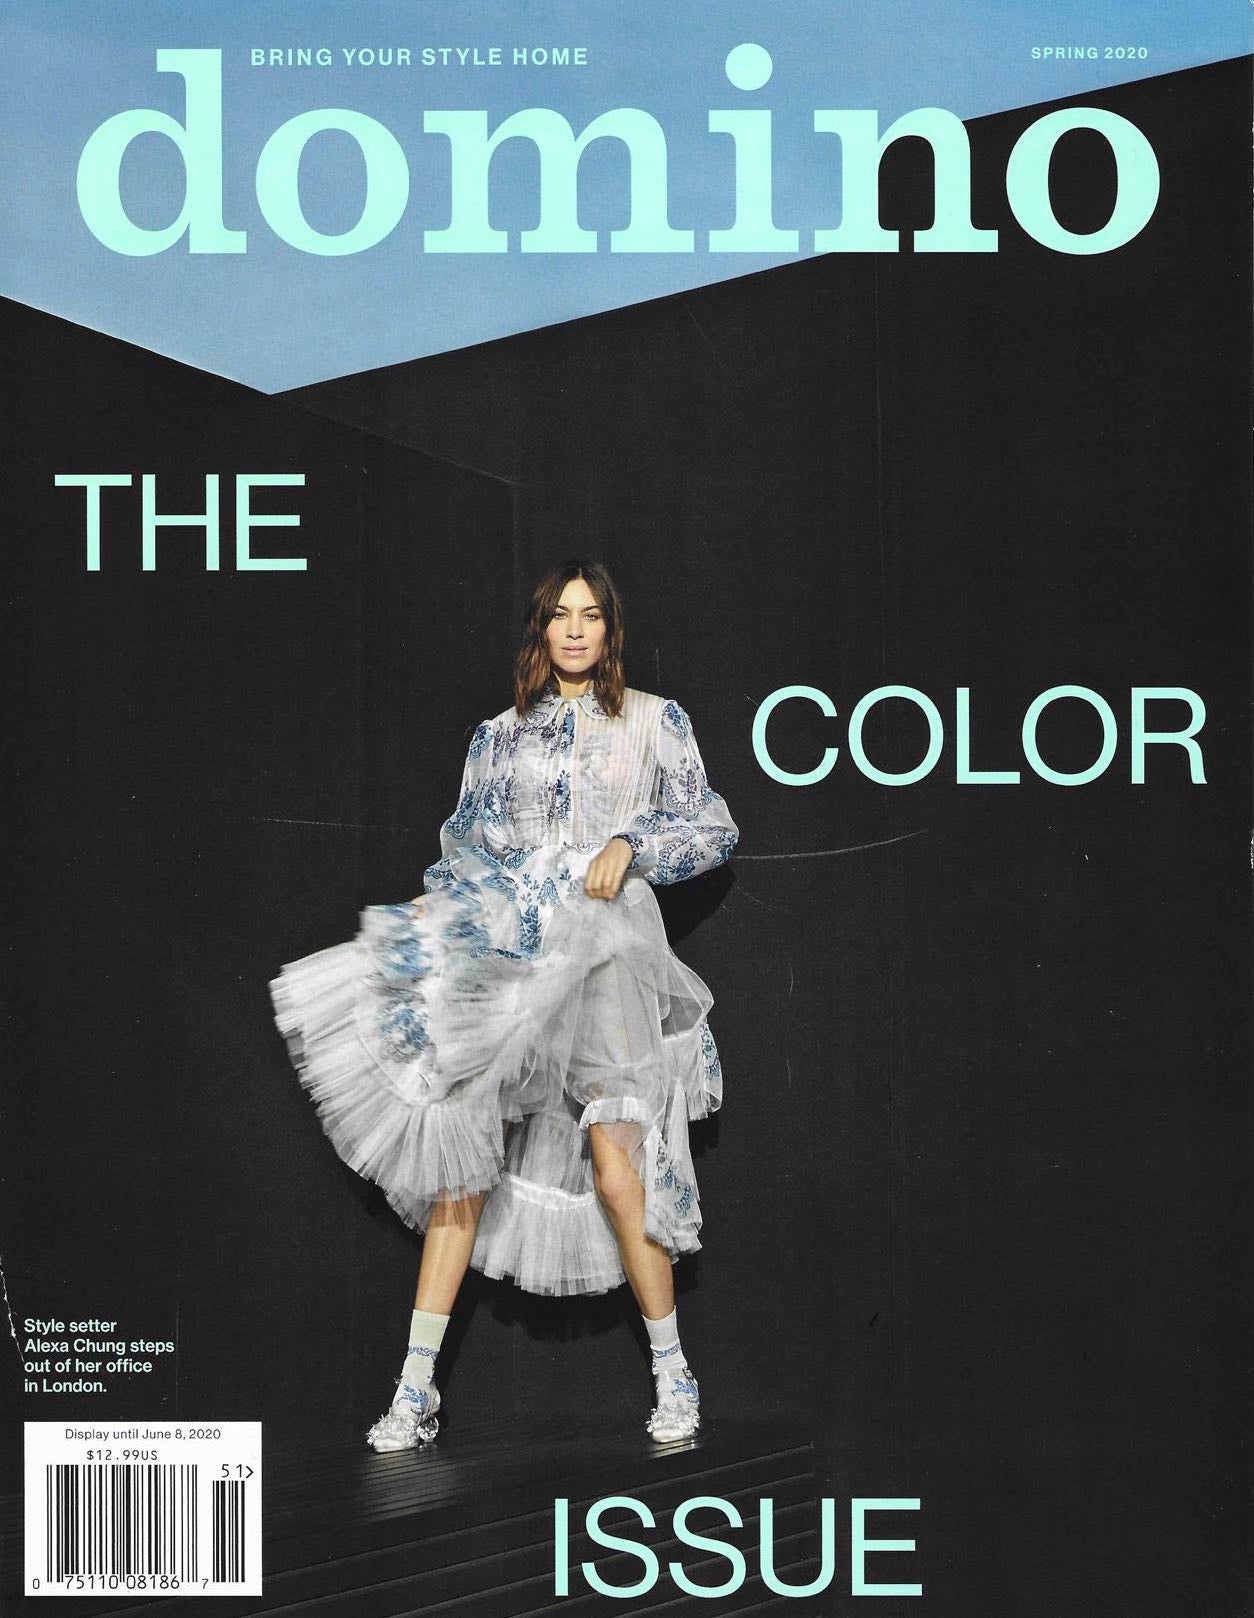 Domino The Color Issue Featuring Alexa Chung, Spring 2020